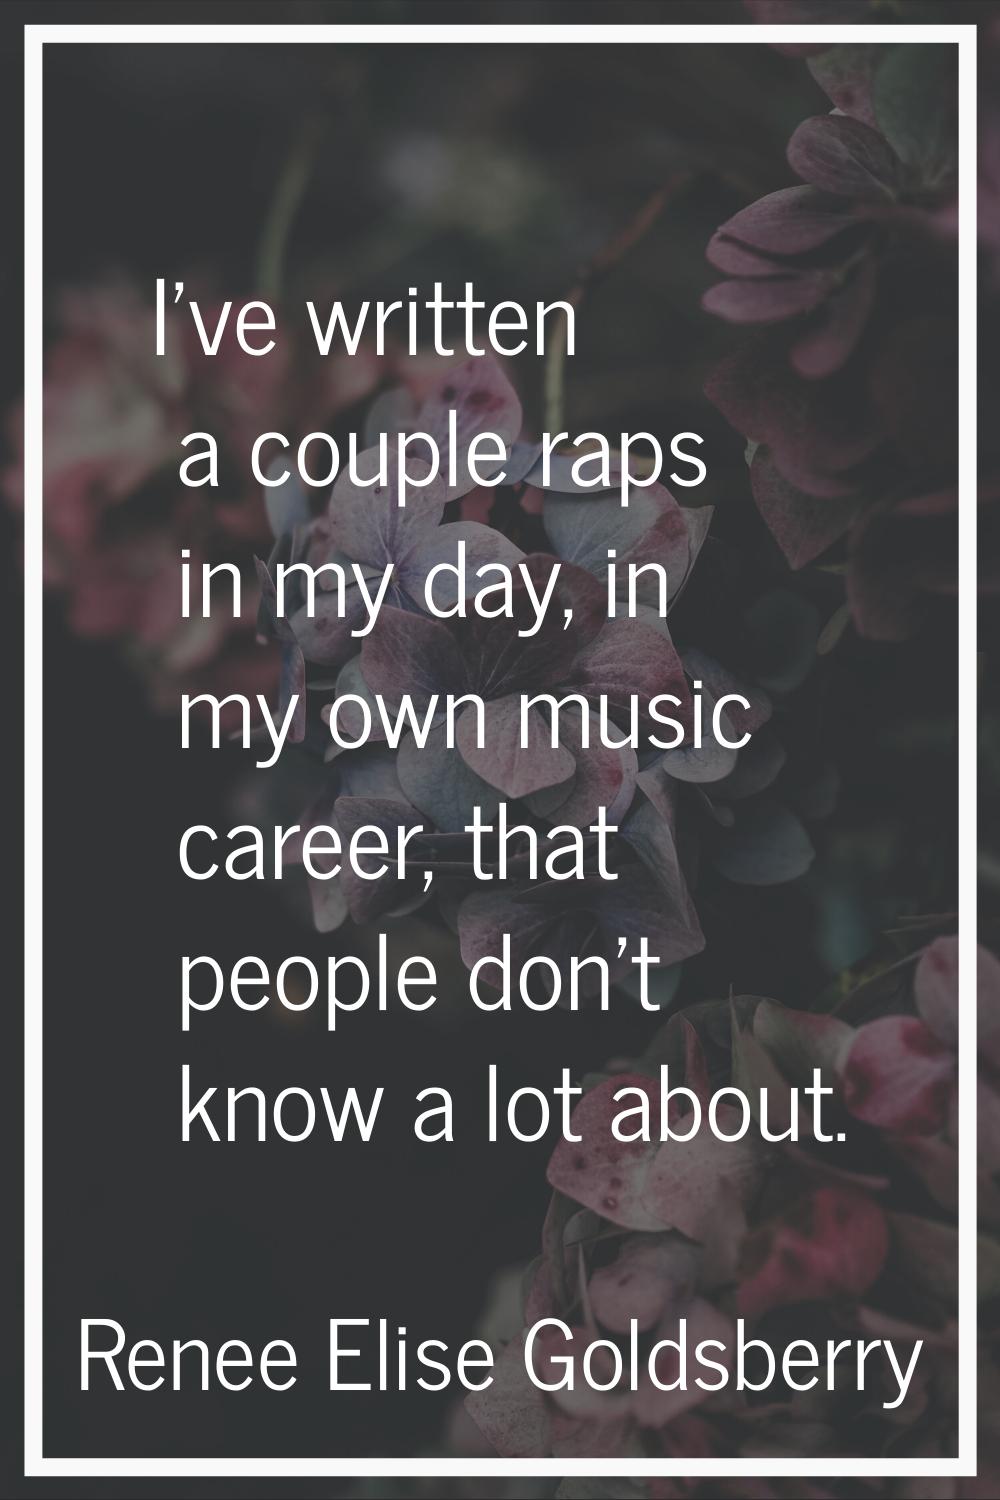 I've written a couple raps in my day, in my own music career, that people don't know a lot about.